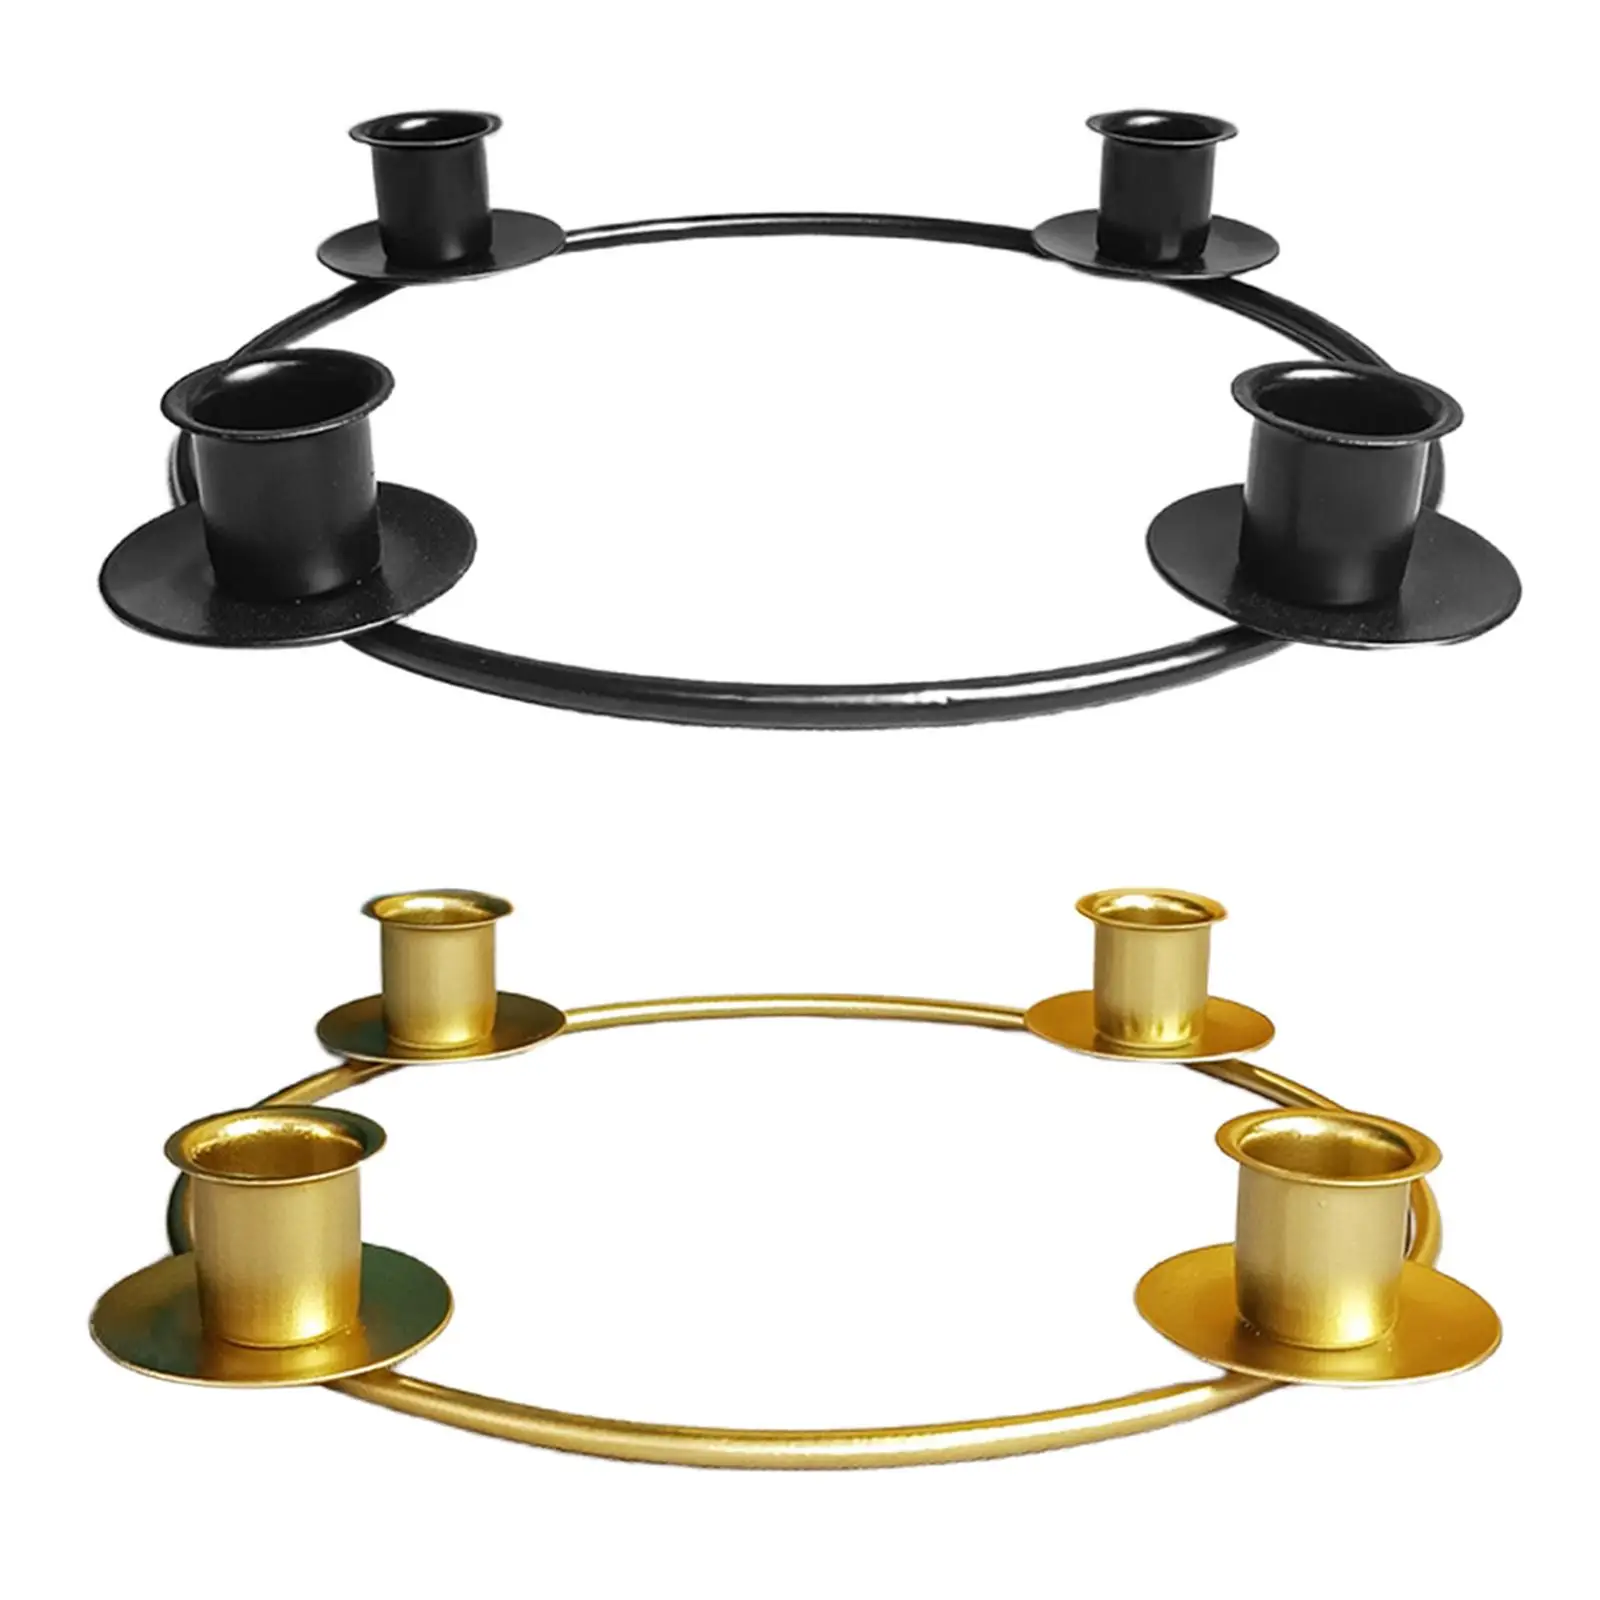 Circle Taper Candle Holder Iron Rings Christmas Advent Candlestick Centerpieces Decoration for Dinning Room Party